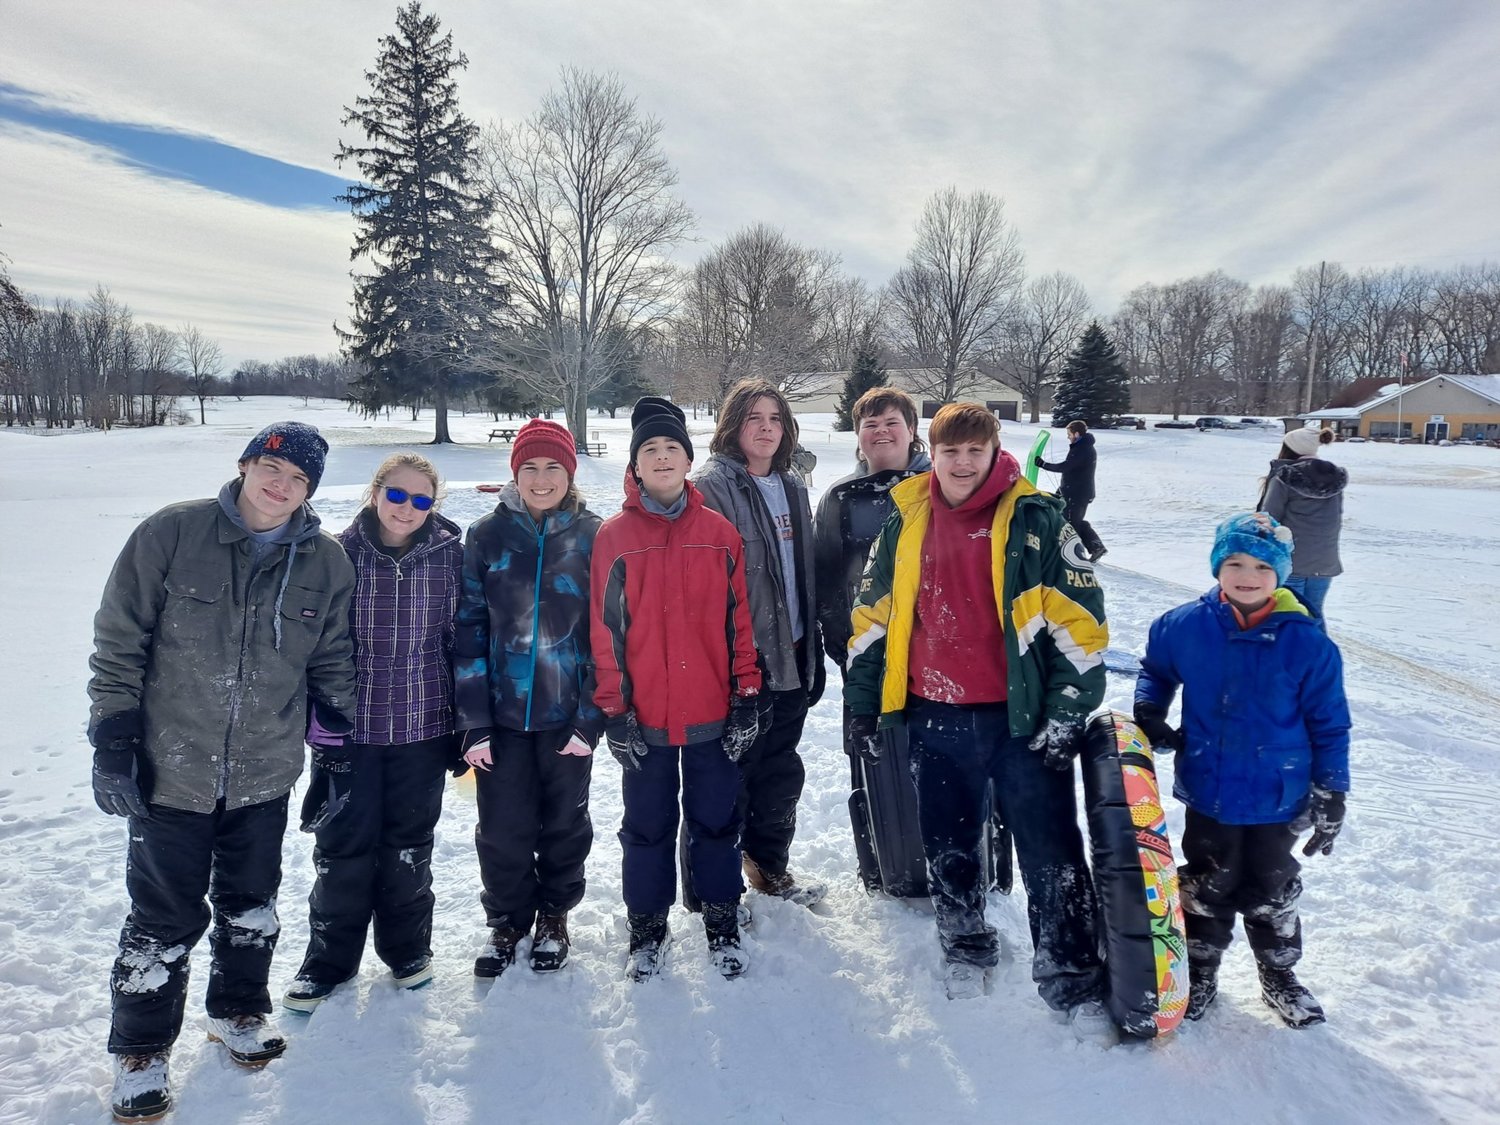 Wil, Makayla, Courtney, Donovan, Colin, Cale, Harmon and Alex after sledding the hills at the Crawfordsville Municipal Golf Course on Friday afternoon.